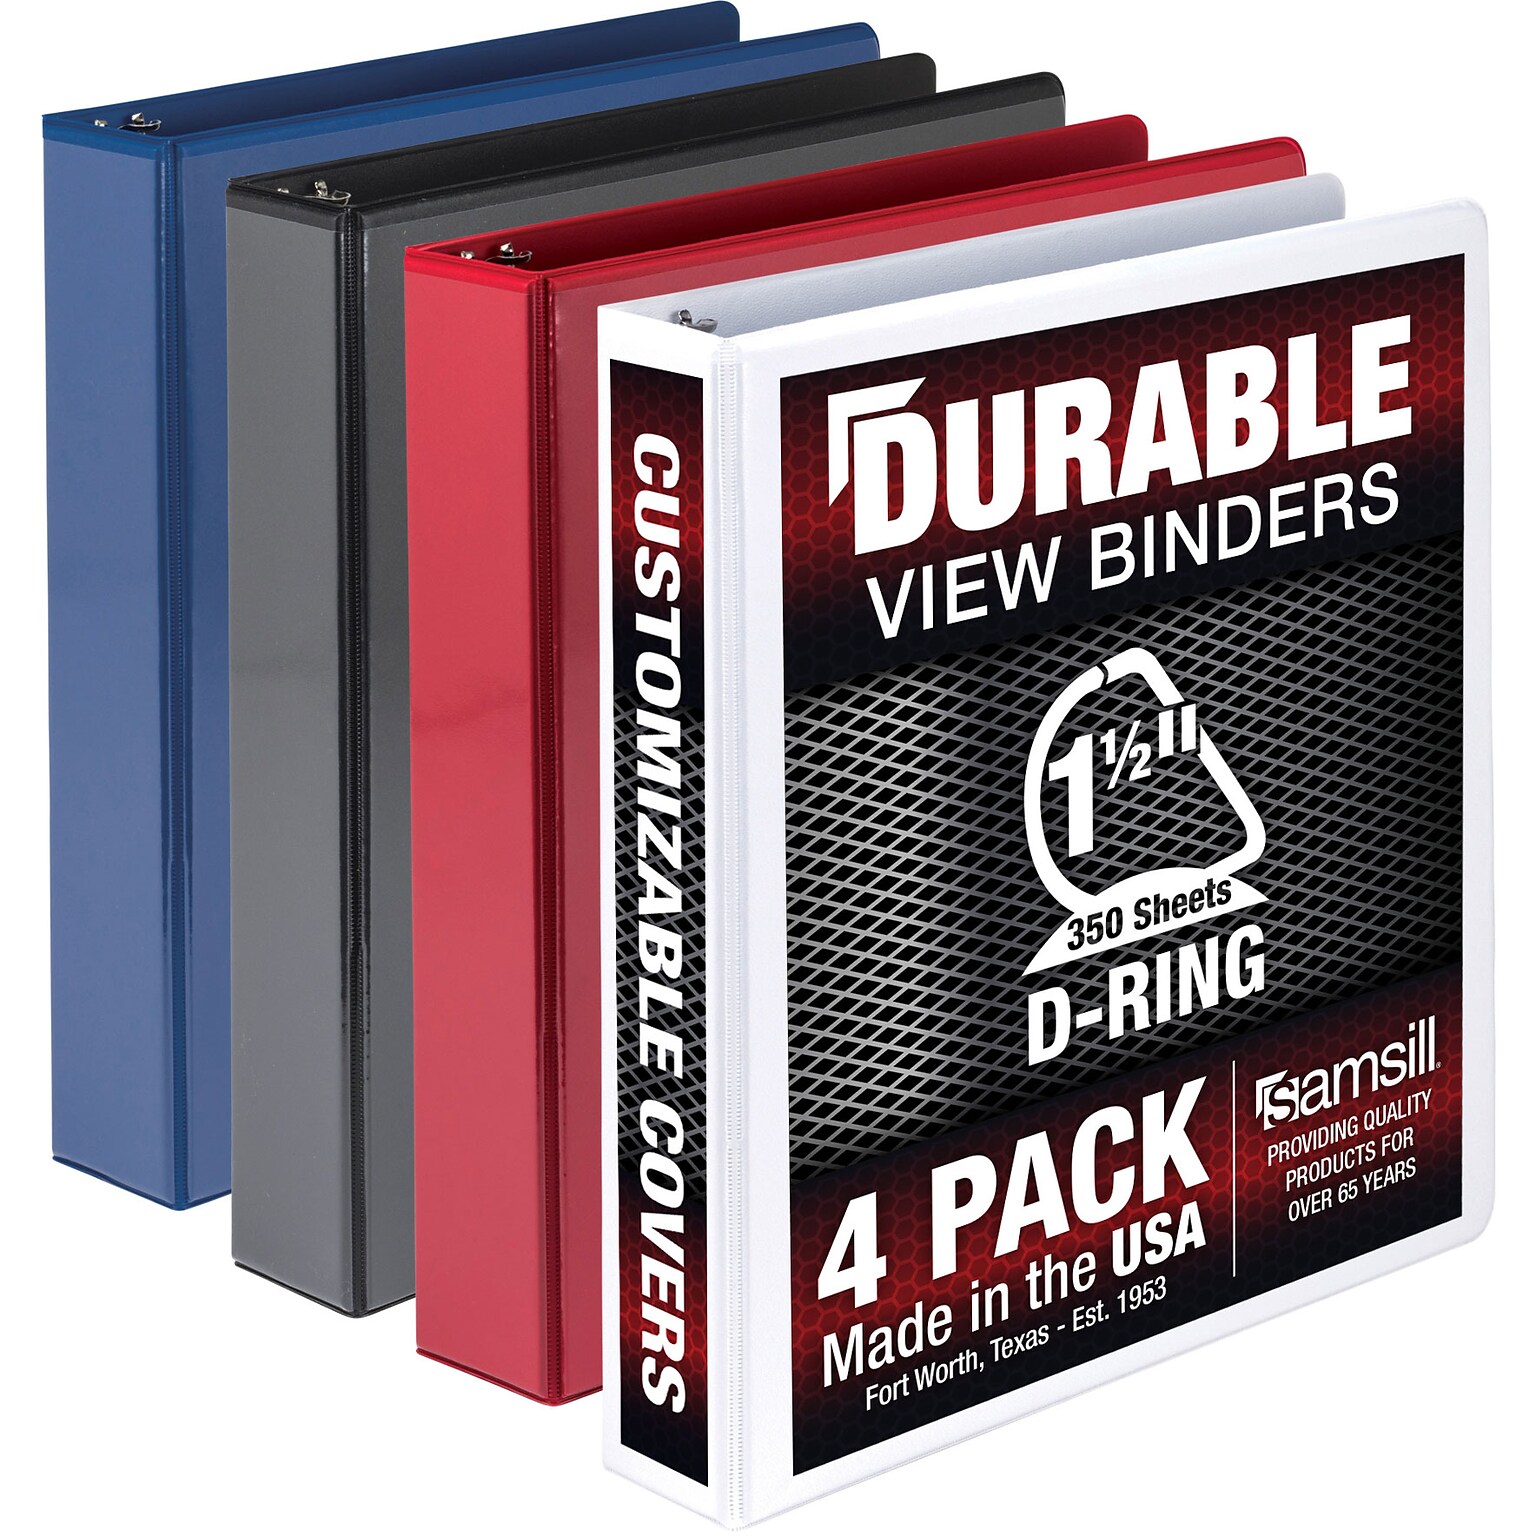 Samsill Durable View Ring Binders 3 D-Ring, Assorted Color, 4 Pack (MP46458)